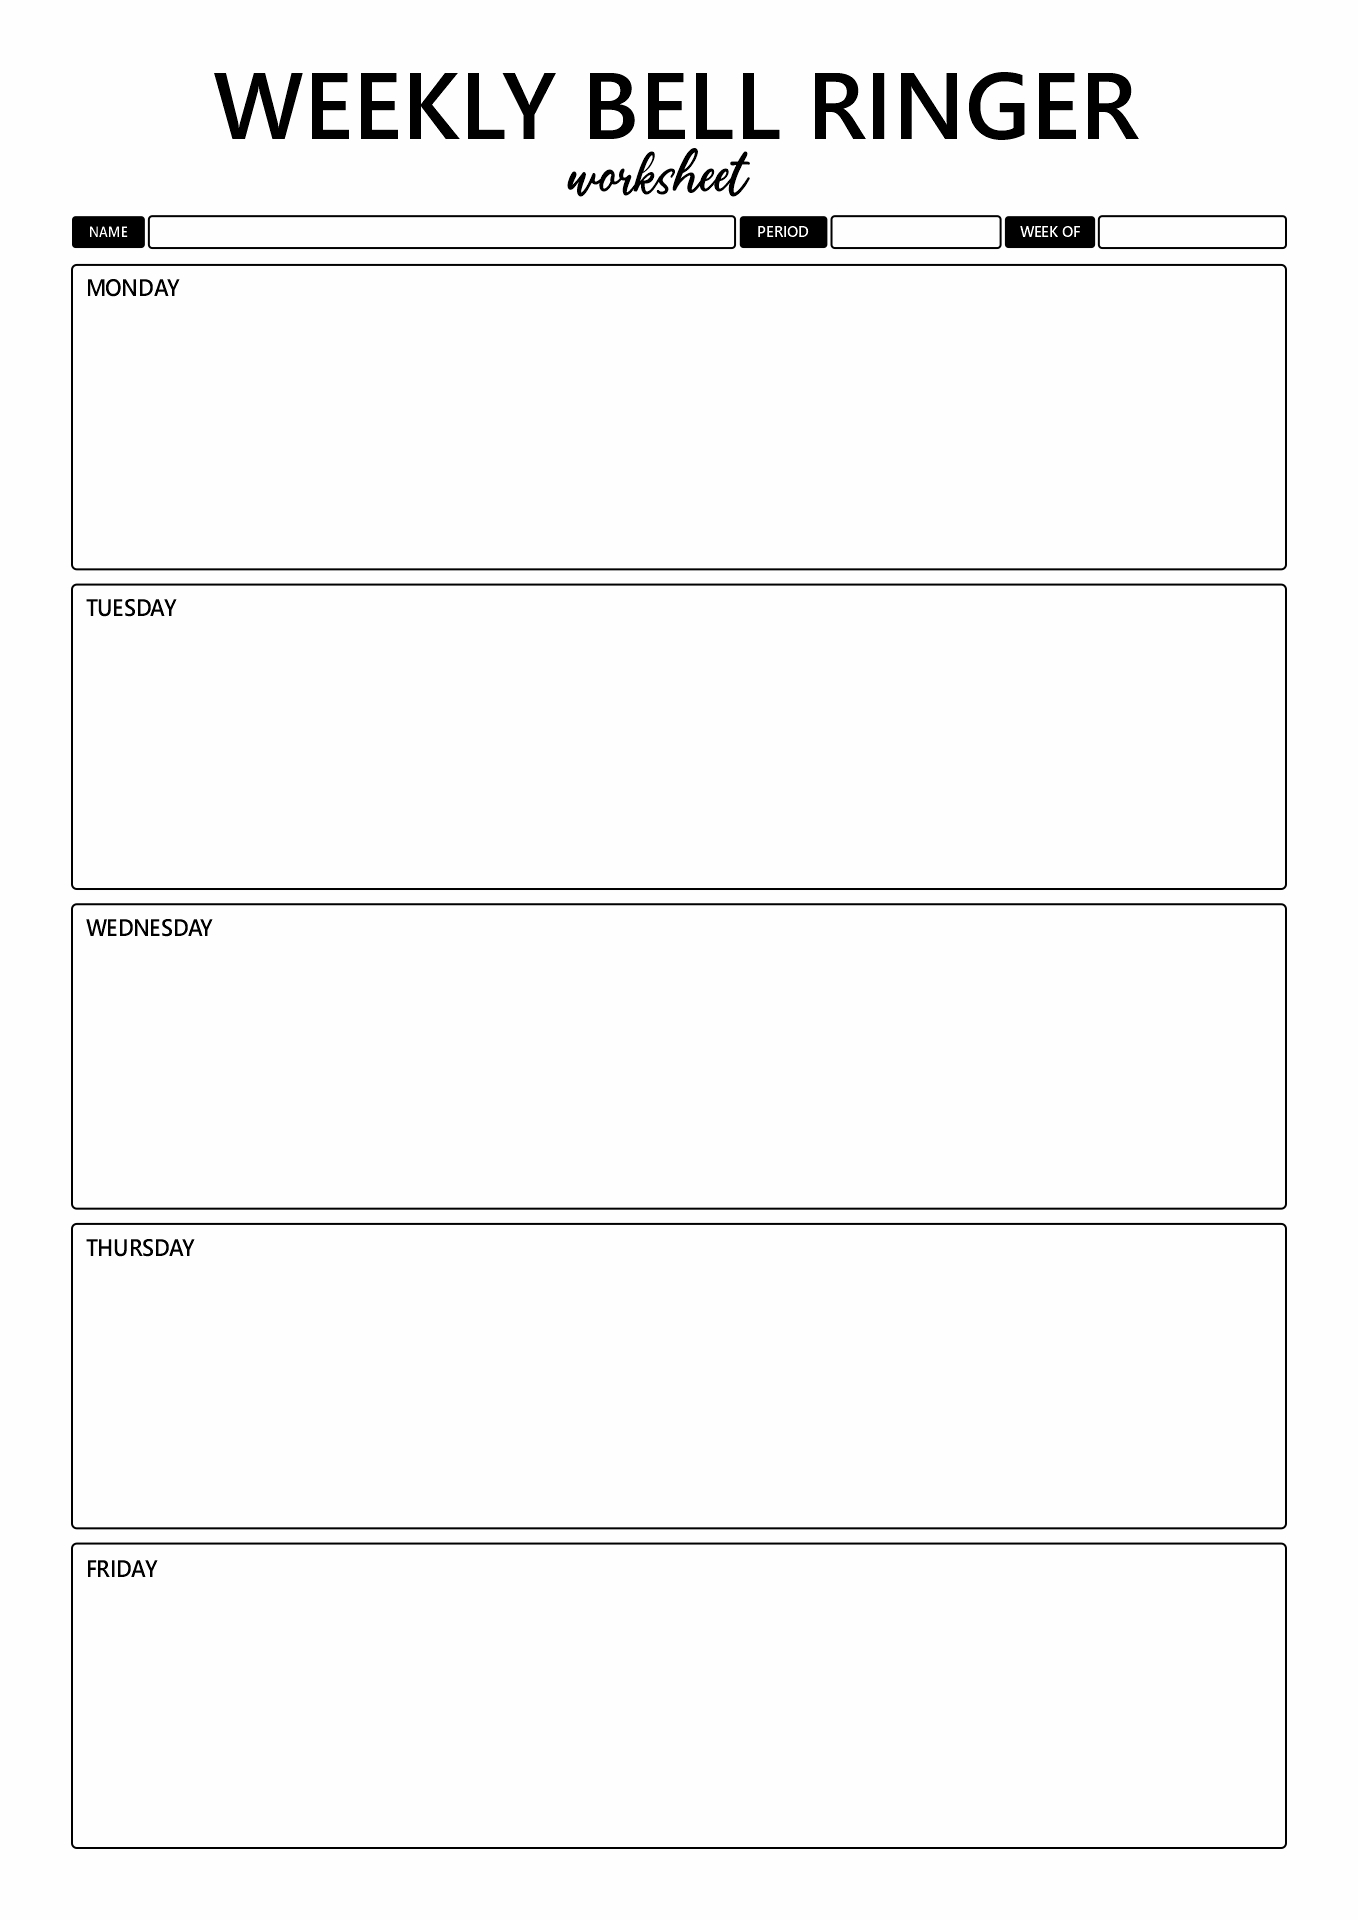 18-best-images-of-time-management-schedule-worksheets-free-time-management-worksheet-weekly